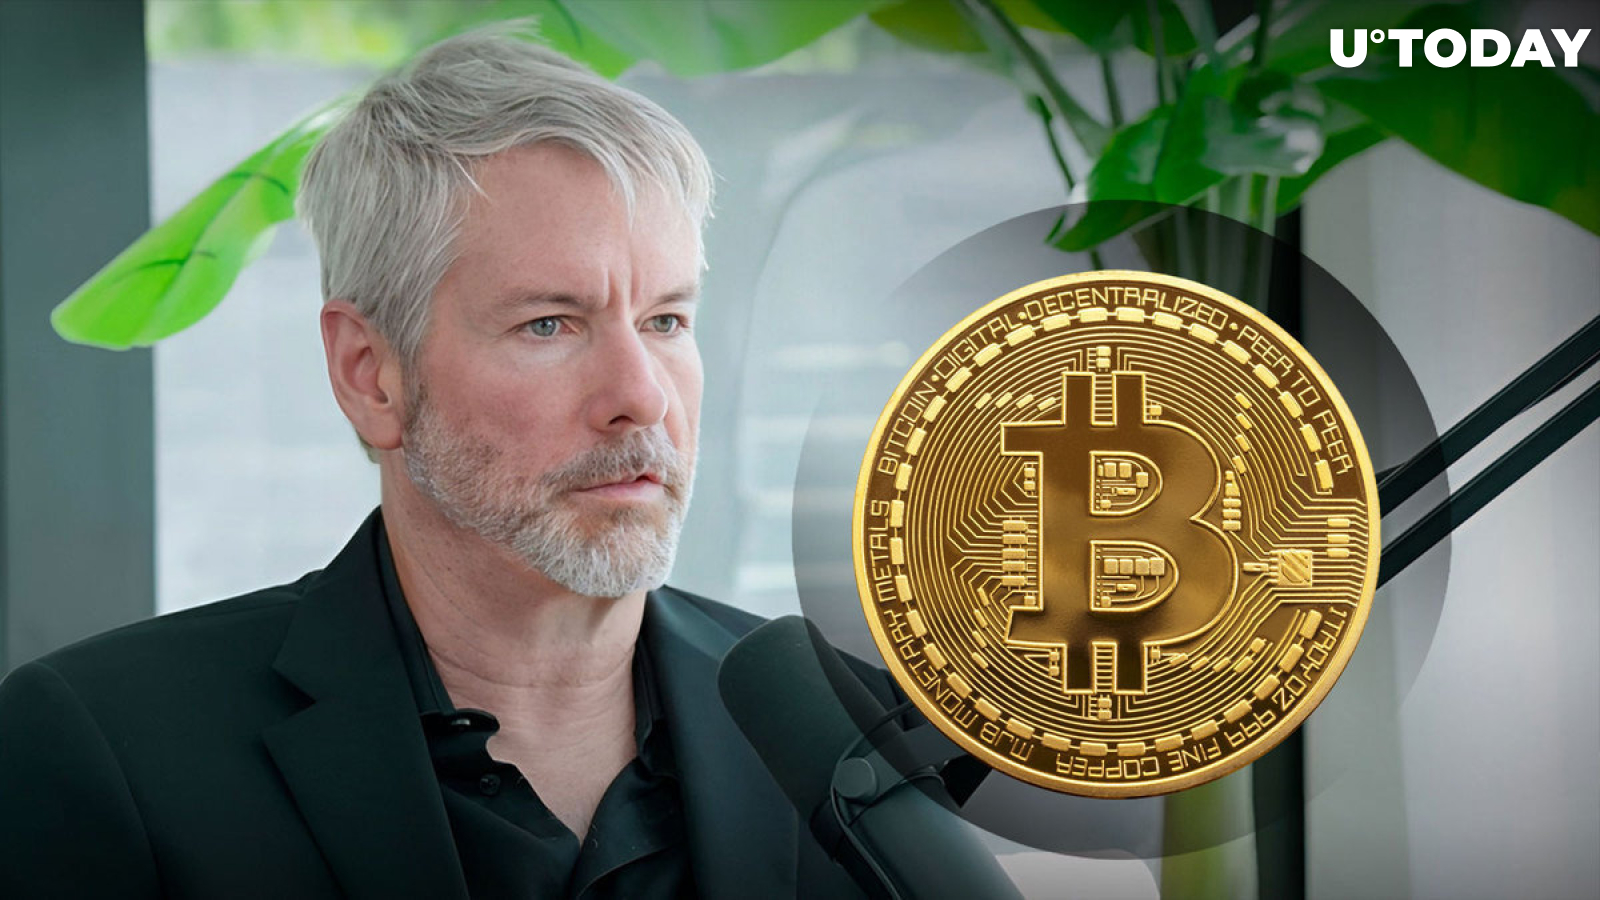 Michael Saylor Issues 'Attractive' Bitcoin Tweet Supported by Community